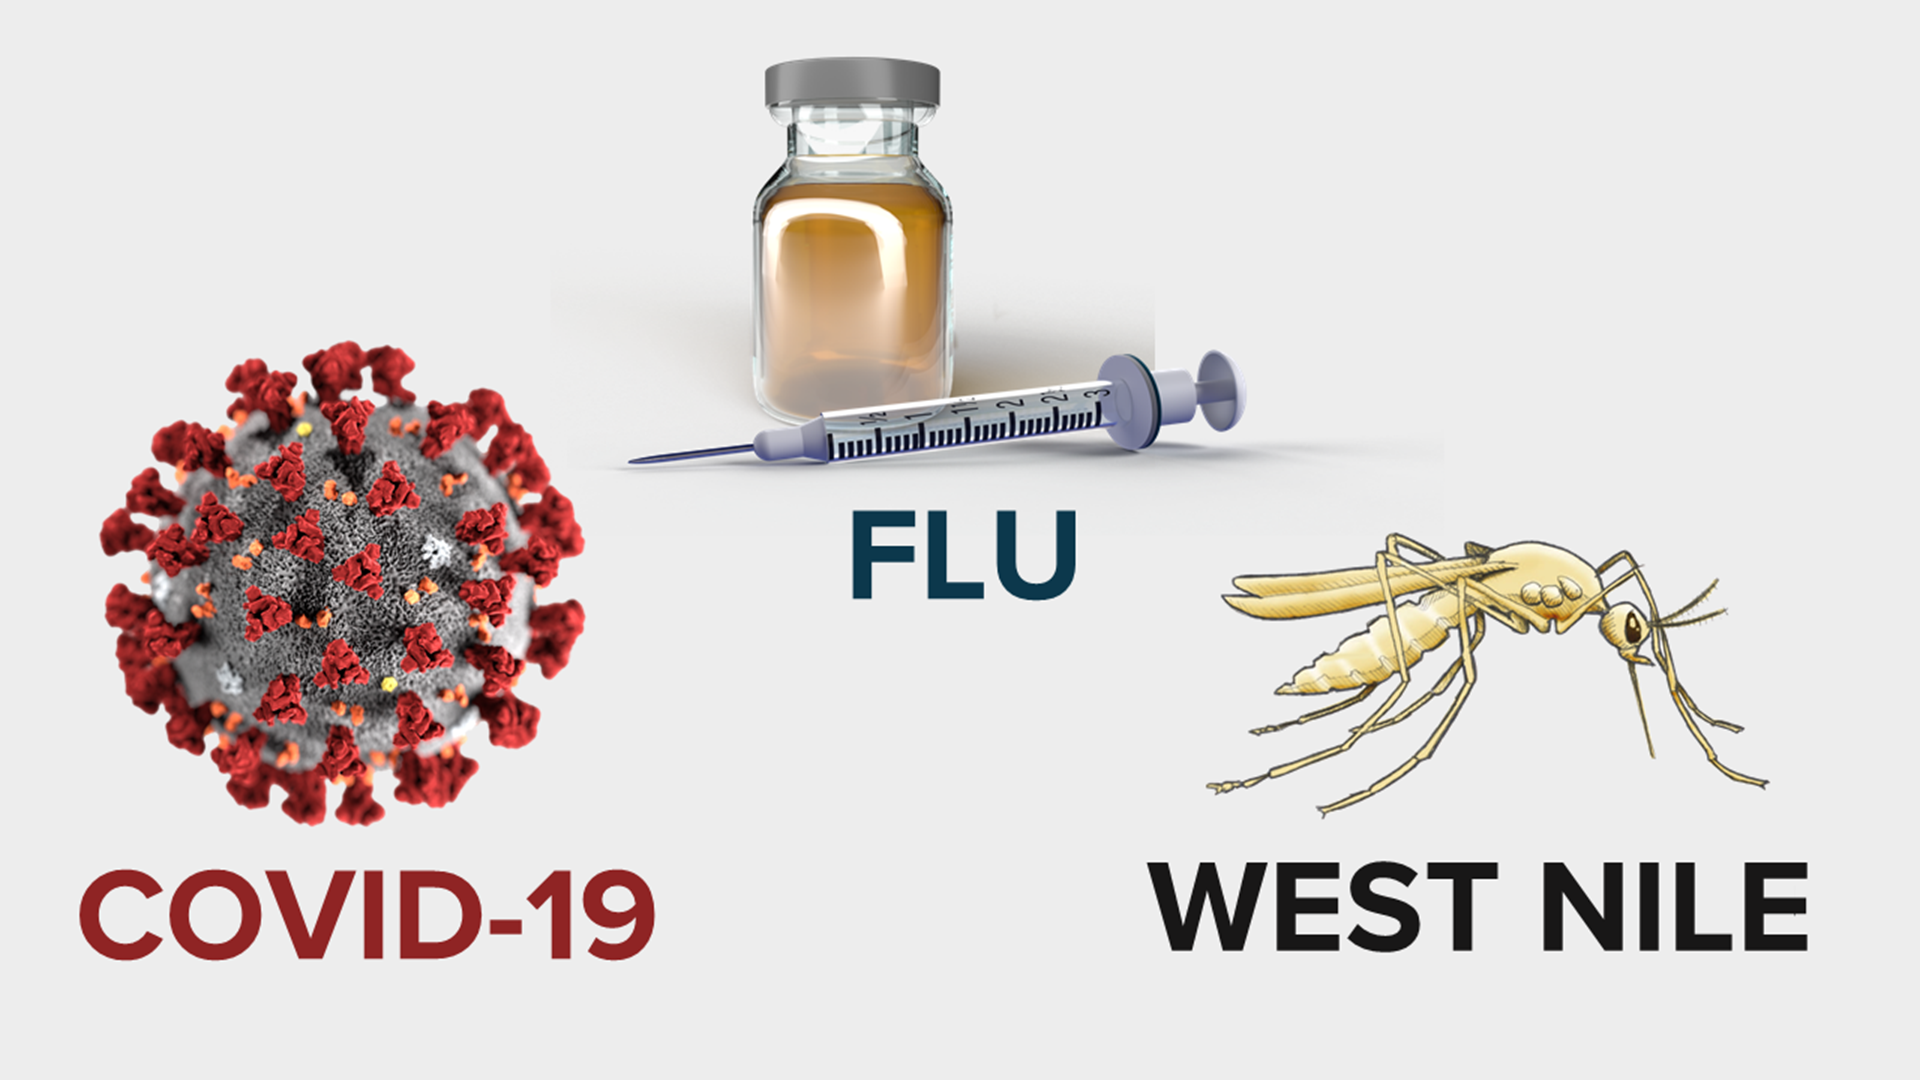 This fall season could potentially be a busy one, thanks to the coronavirus (COVID-19), influenza (flu), and West Nile -- and the similar symptoms they all pose.